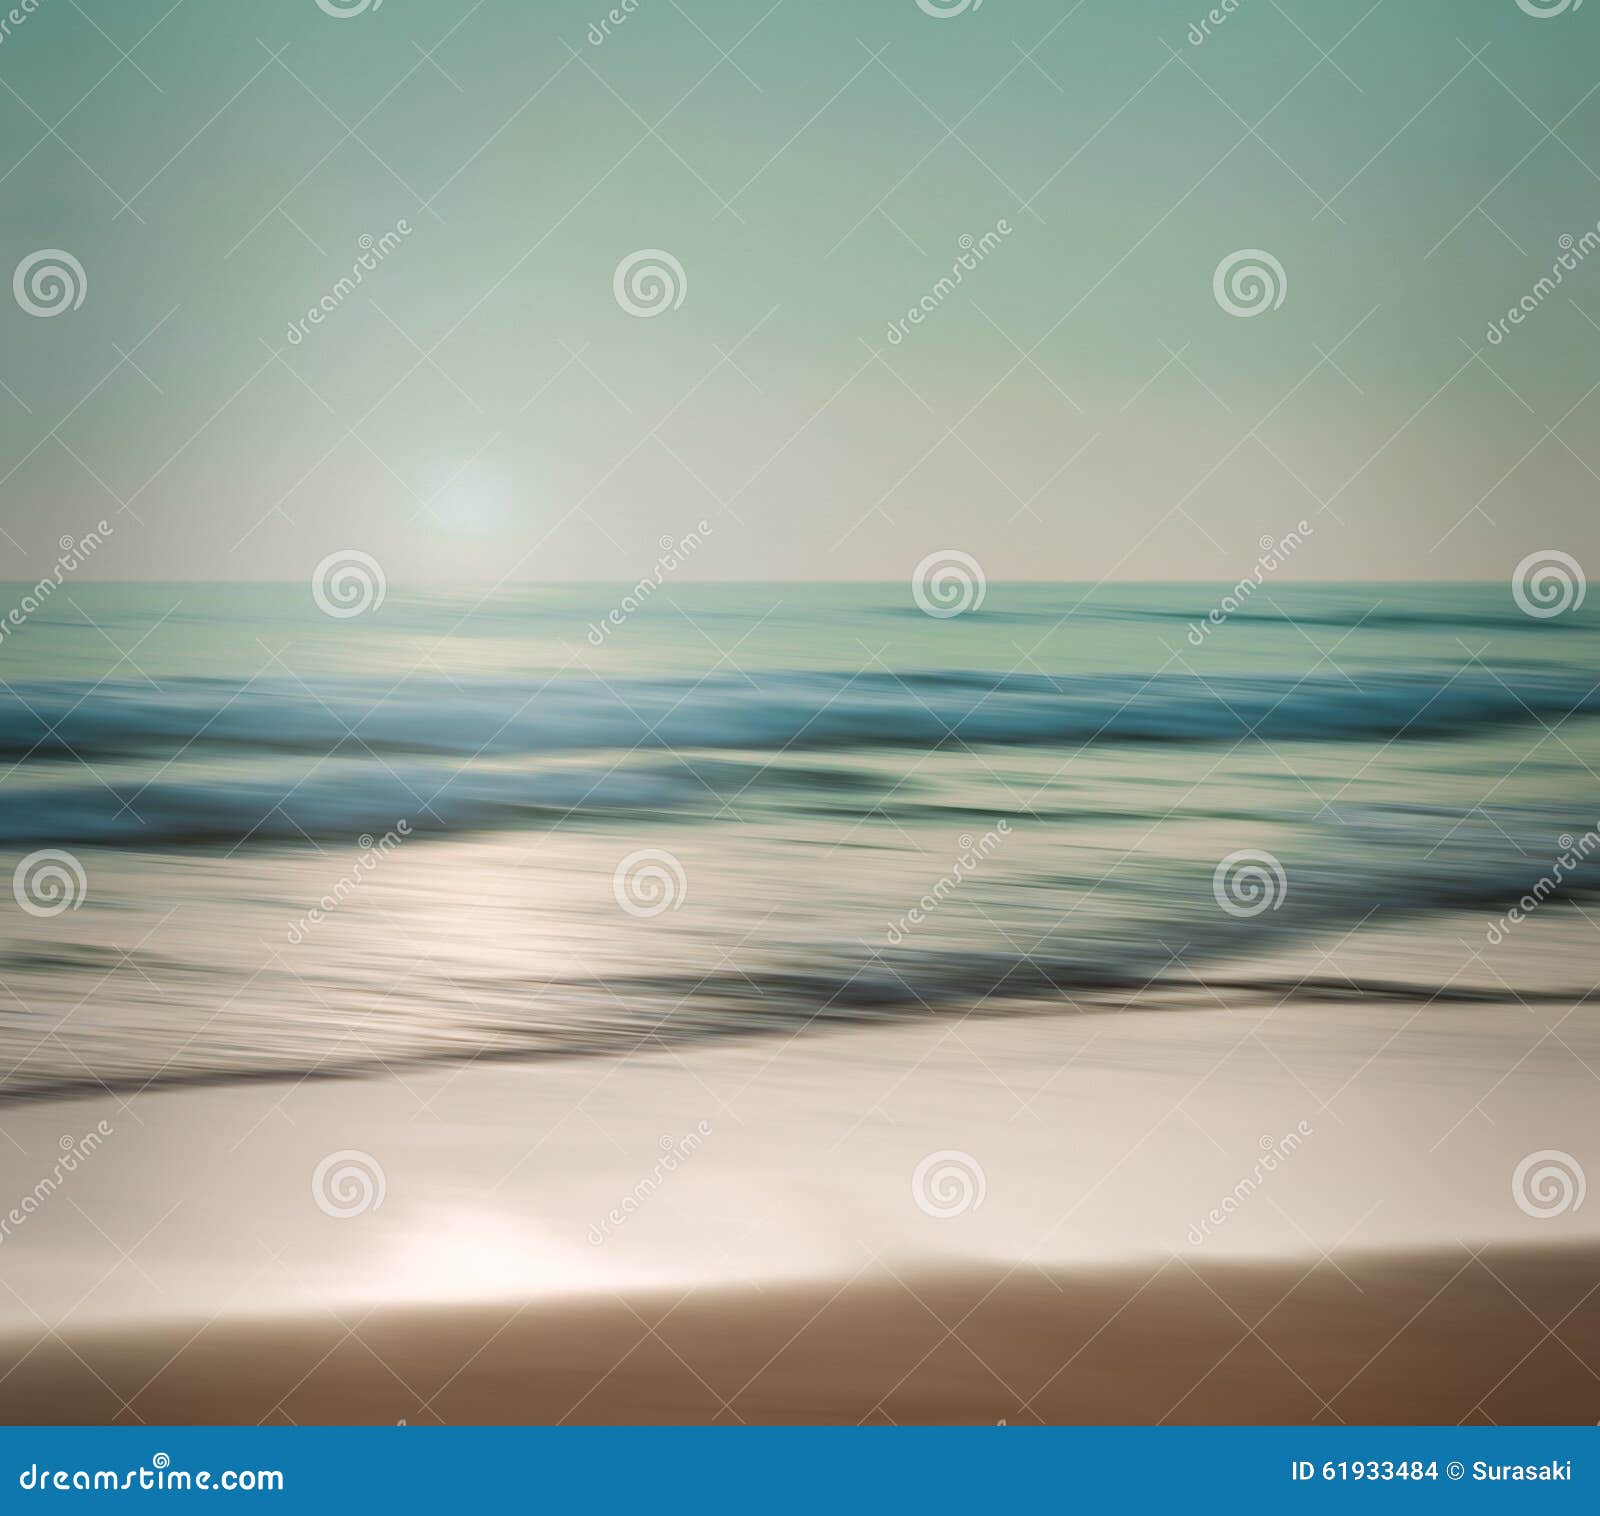 an abstract seascape with blurred panning motion on paper background